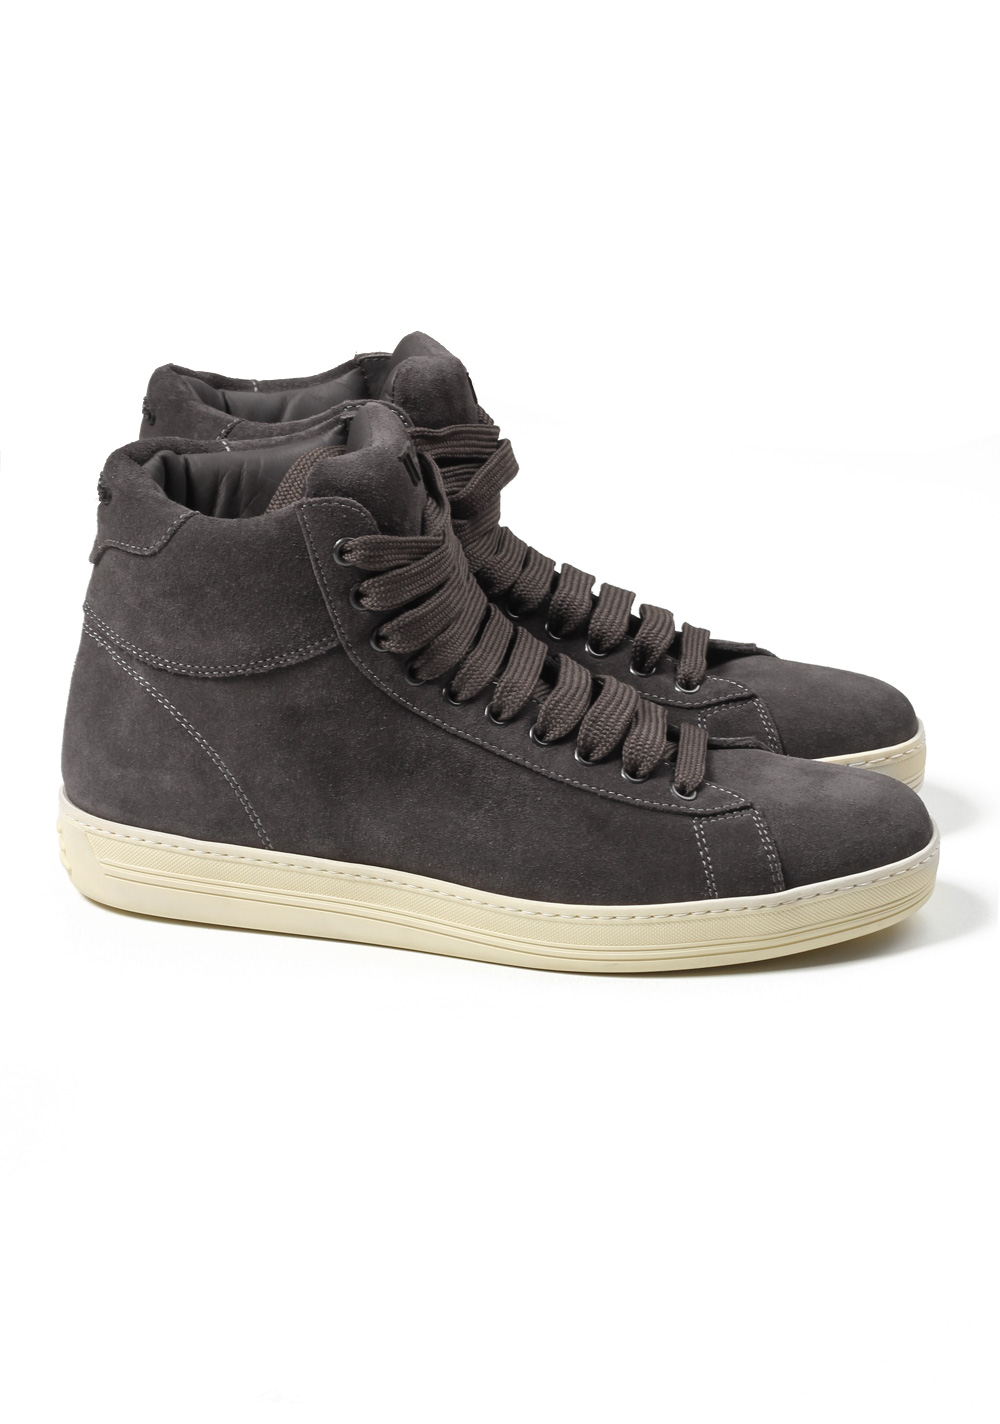 TOM FORD Russel High Top Gray Suede Sneaker Shoes Size 9 Uk / 10 U.S. | Costume Limité